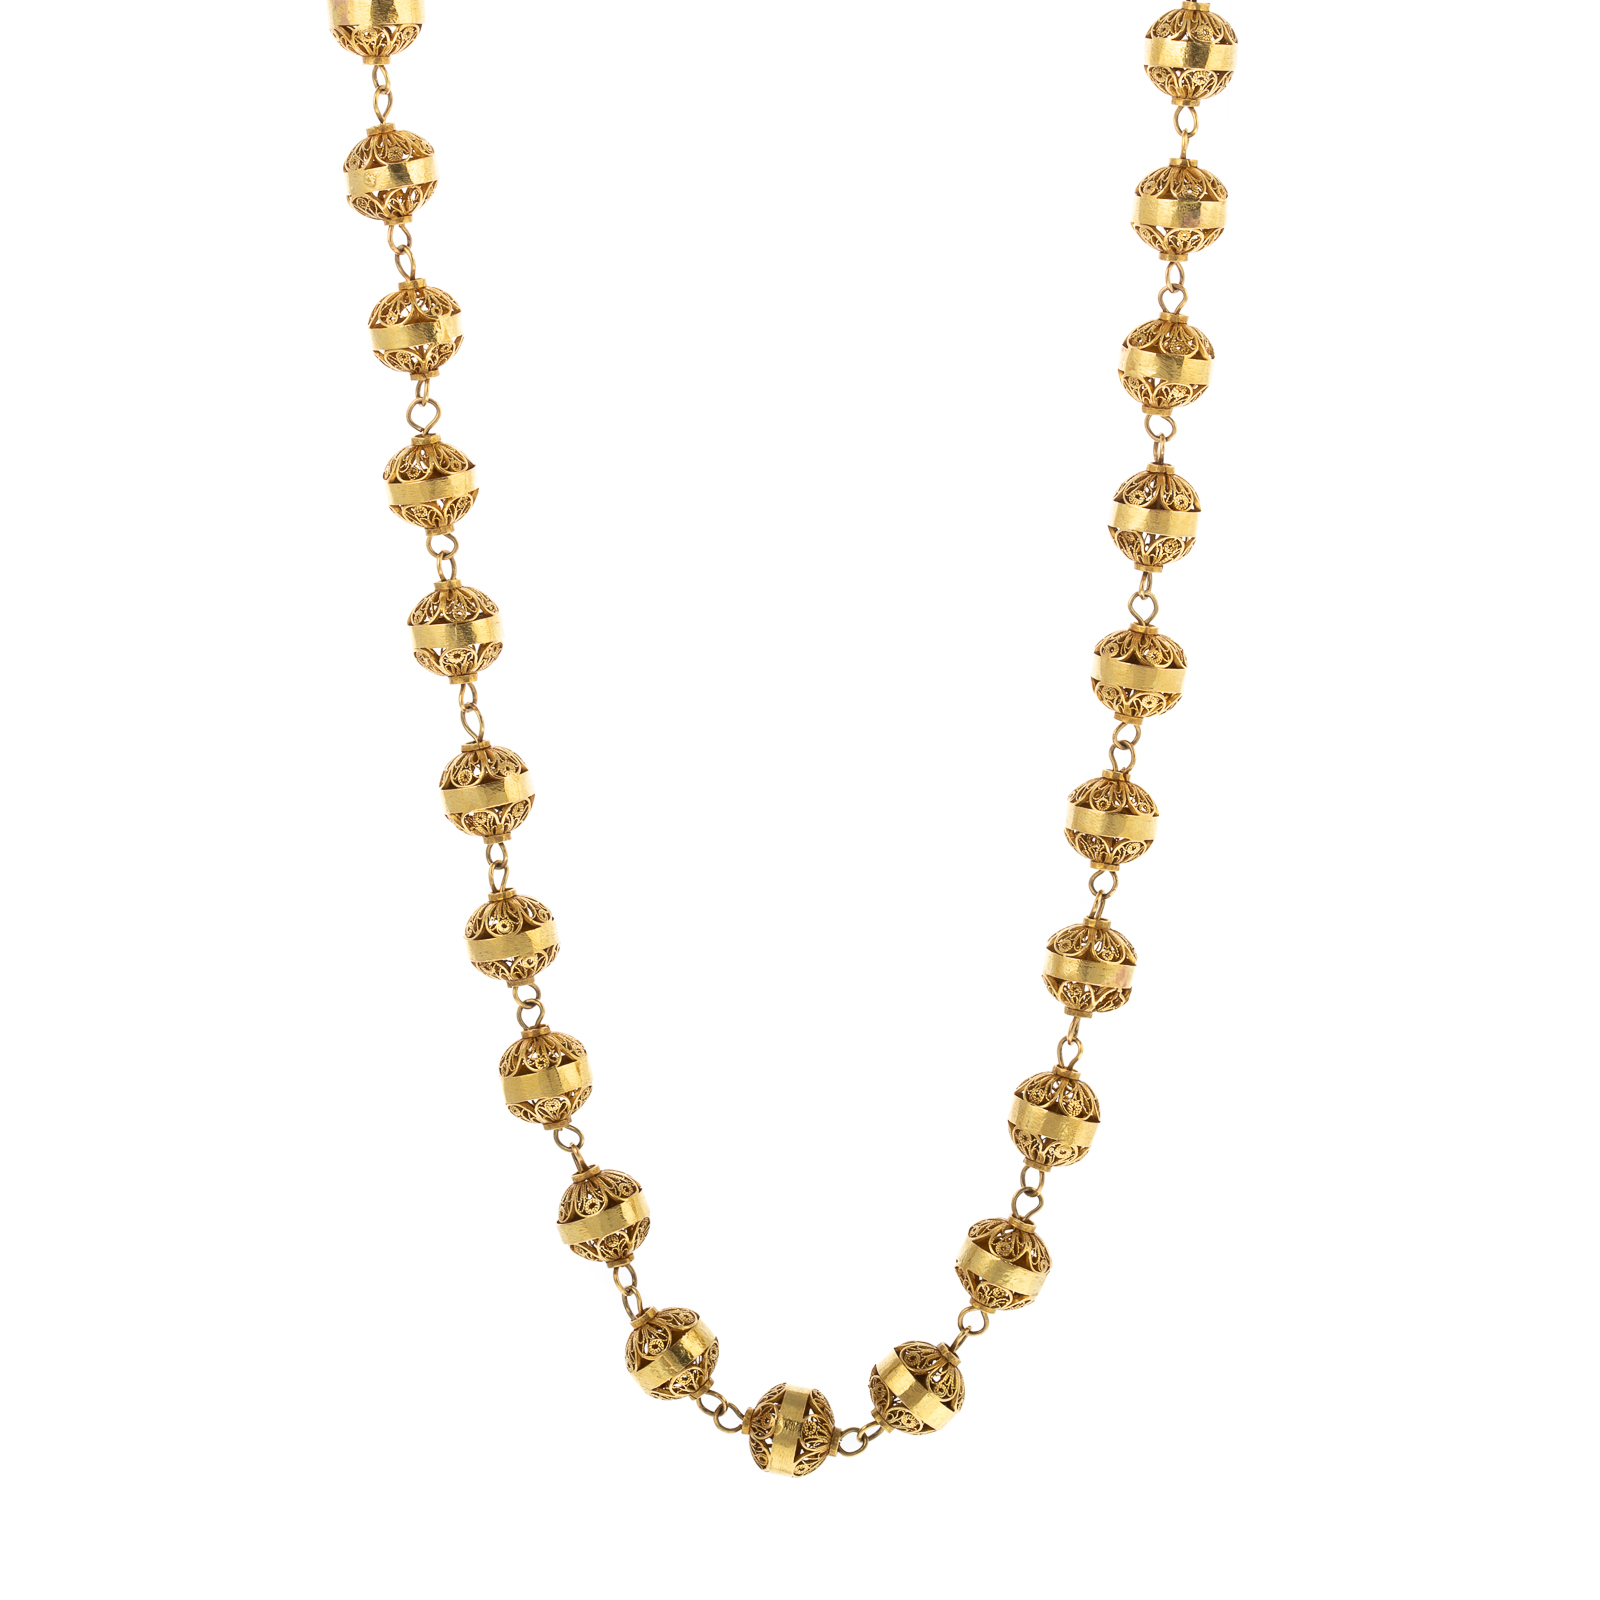 A LONG FILIGREE BEAD NECKLACE IN 2878b1